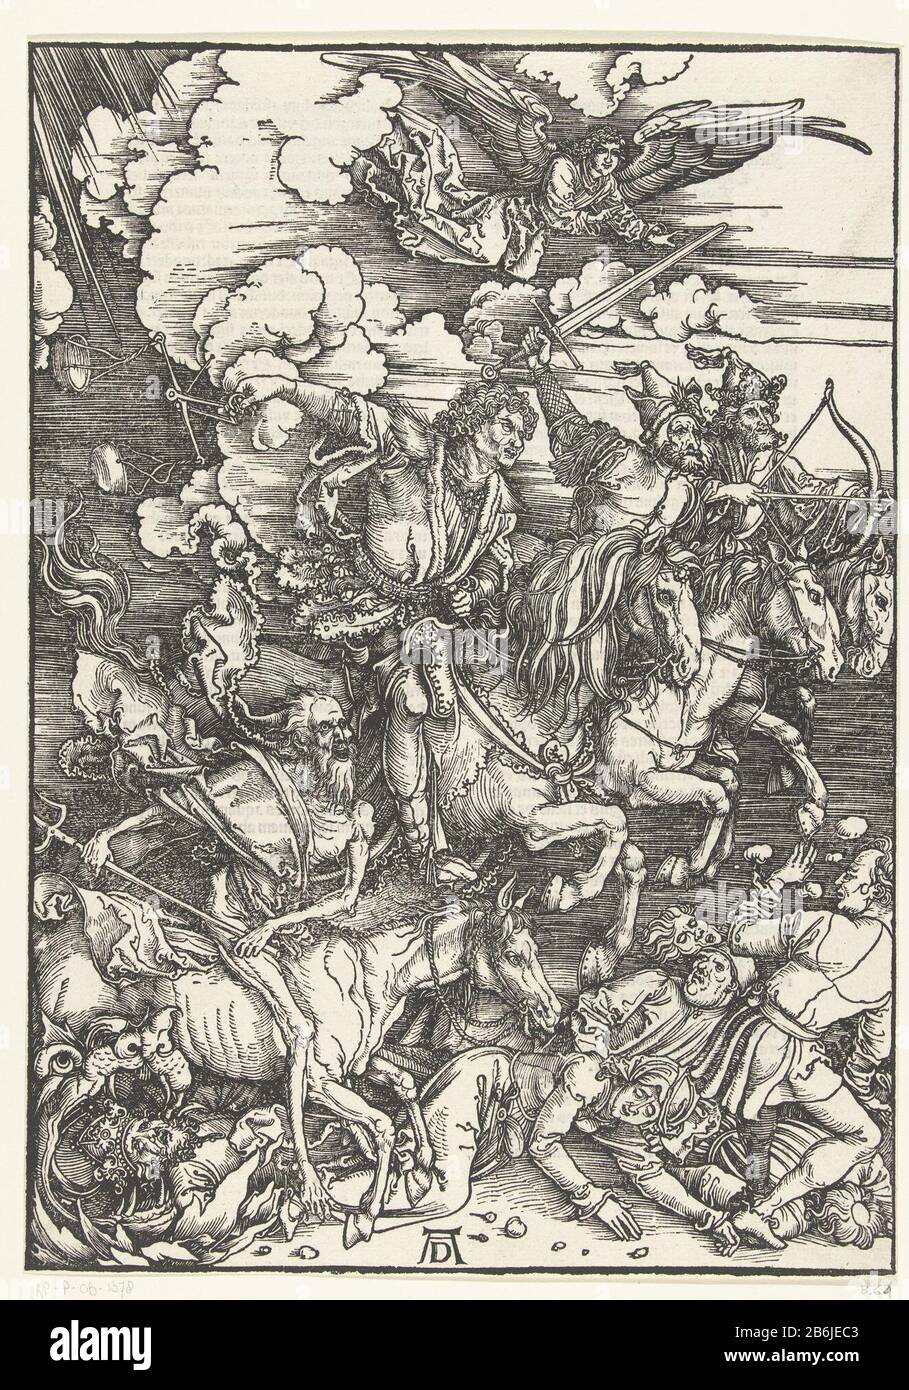 The four horsemen of the apocalypse Four men on horseback armed with a bow and arrow, a heavily d, scales and a rake, walk people underfoot. On verso Latin Bible in Gothic script in two kolommen. Manufacturer : printmaker Albrecht Dürer (listed property) Place manufacture: Nuremberg Date: 1497-1498 and / or 1511 Physical features: woodcut and letterpress material: paper Technique: woodcut / printing sizes: image: h 394 mm x W 280 mmToelichtingIllustratie in a Latin edition of the Book of Revelation. Klinkert, C. Subject: the four horsemen of the Apocalypse Stock Photo